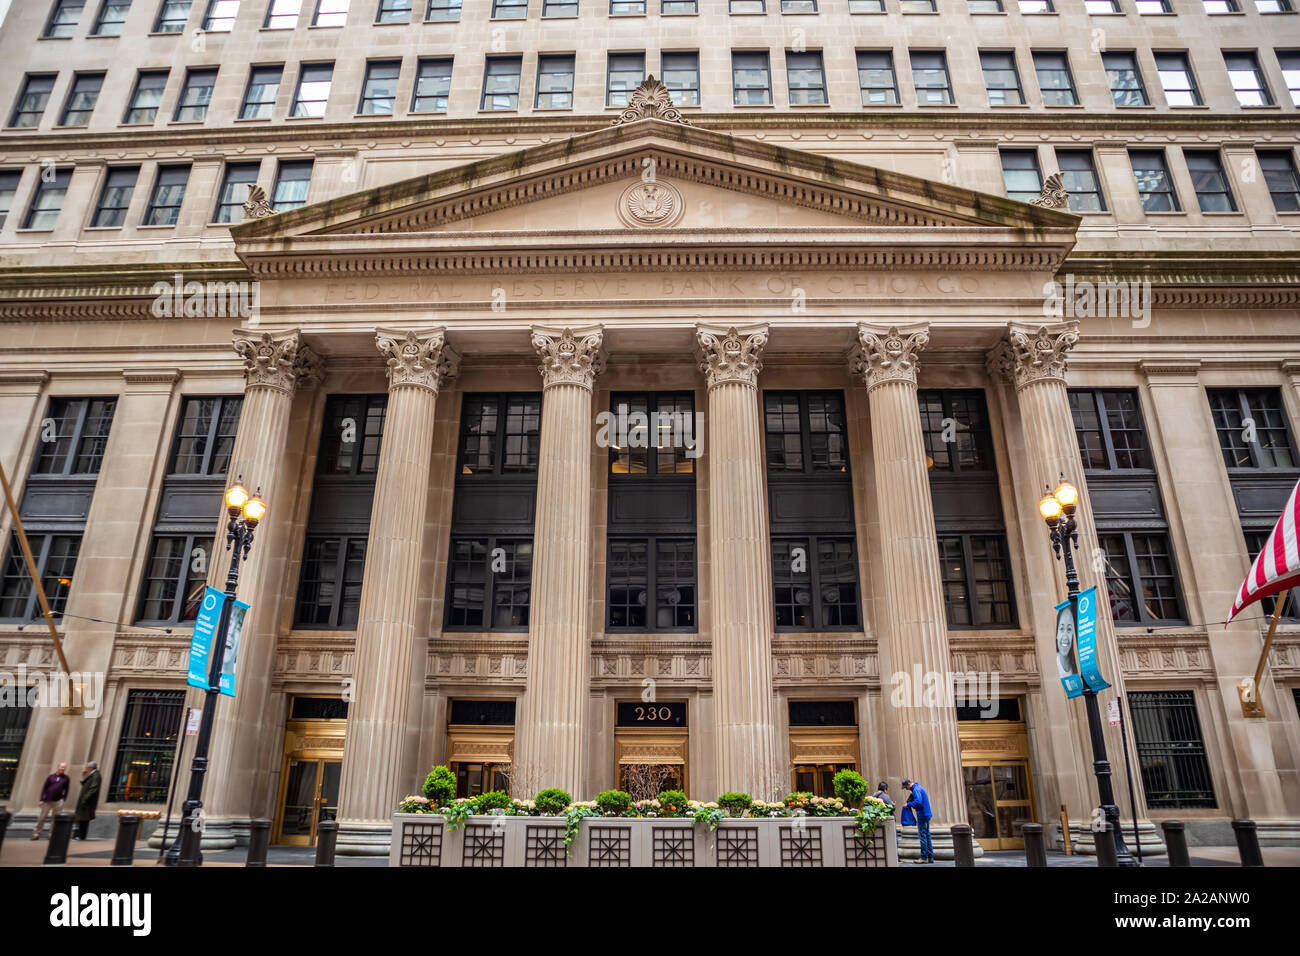 Chicago, Illinois, USA. May 9, 2019. The Federal Reserve Bank of Chicago, at Lasalle street, US. Facade of the stone building background. Stock Photo